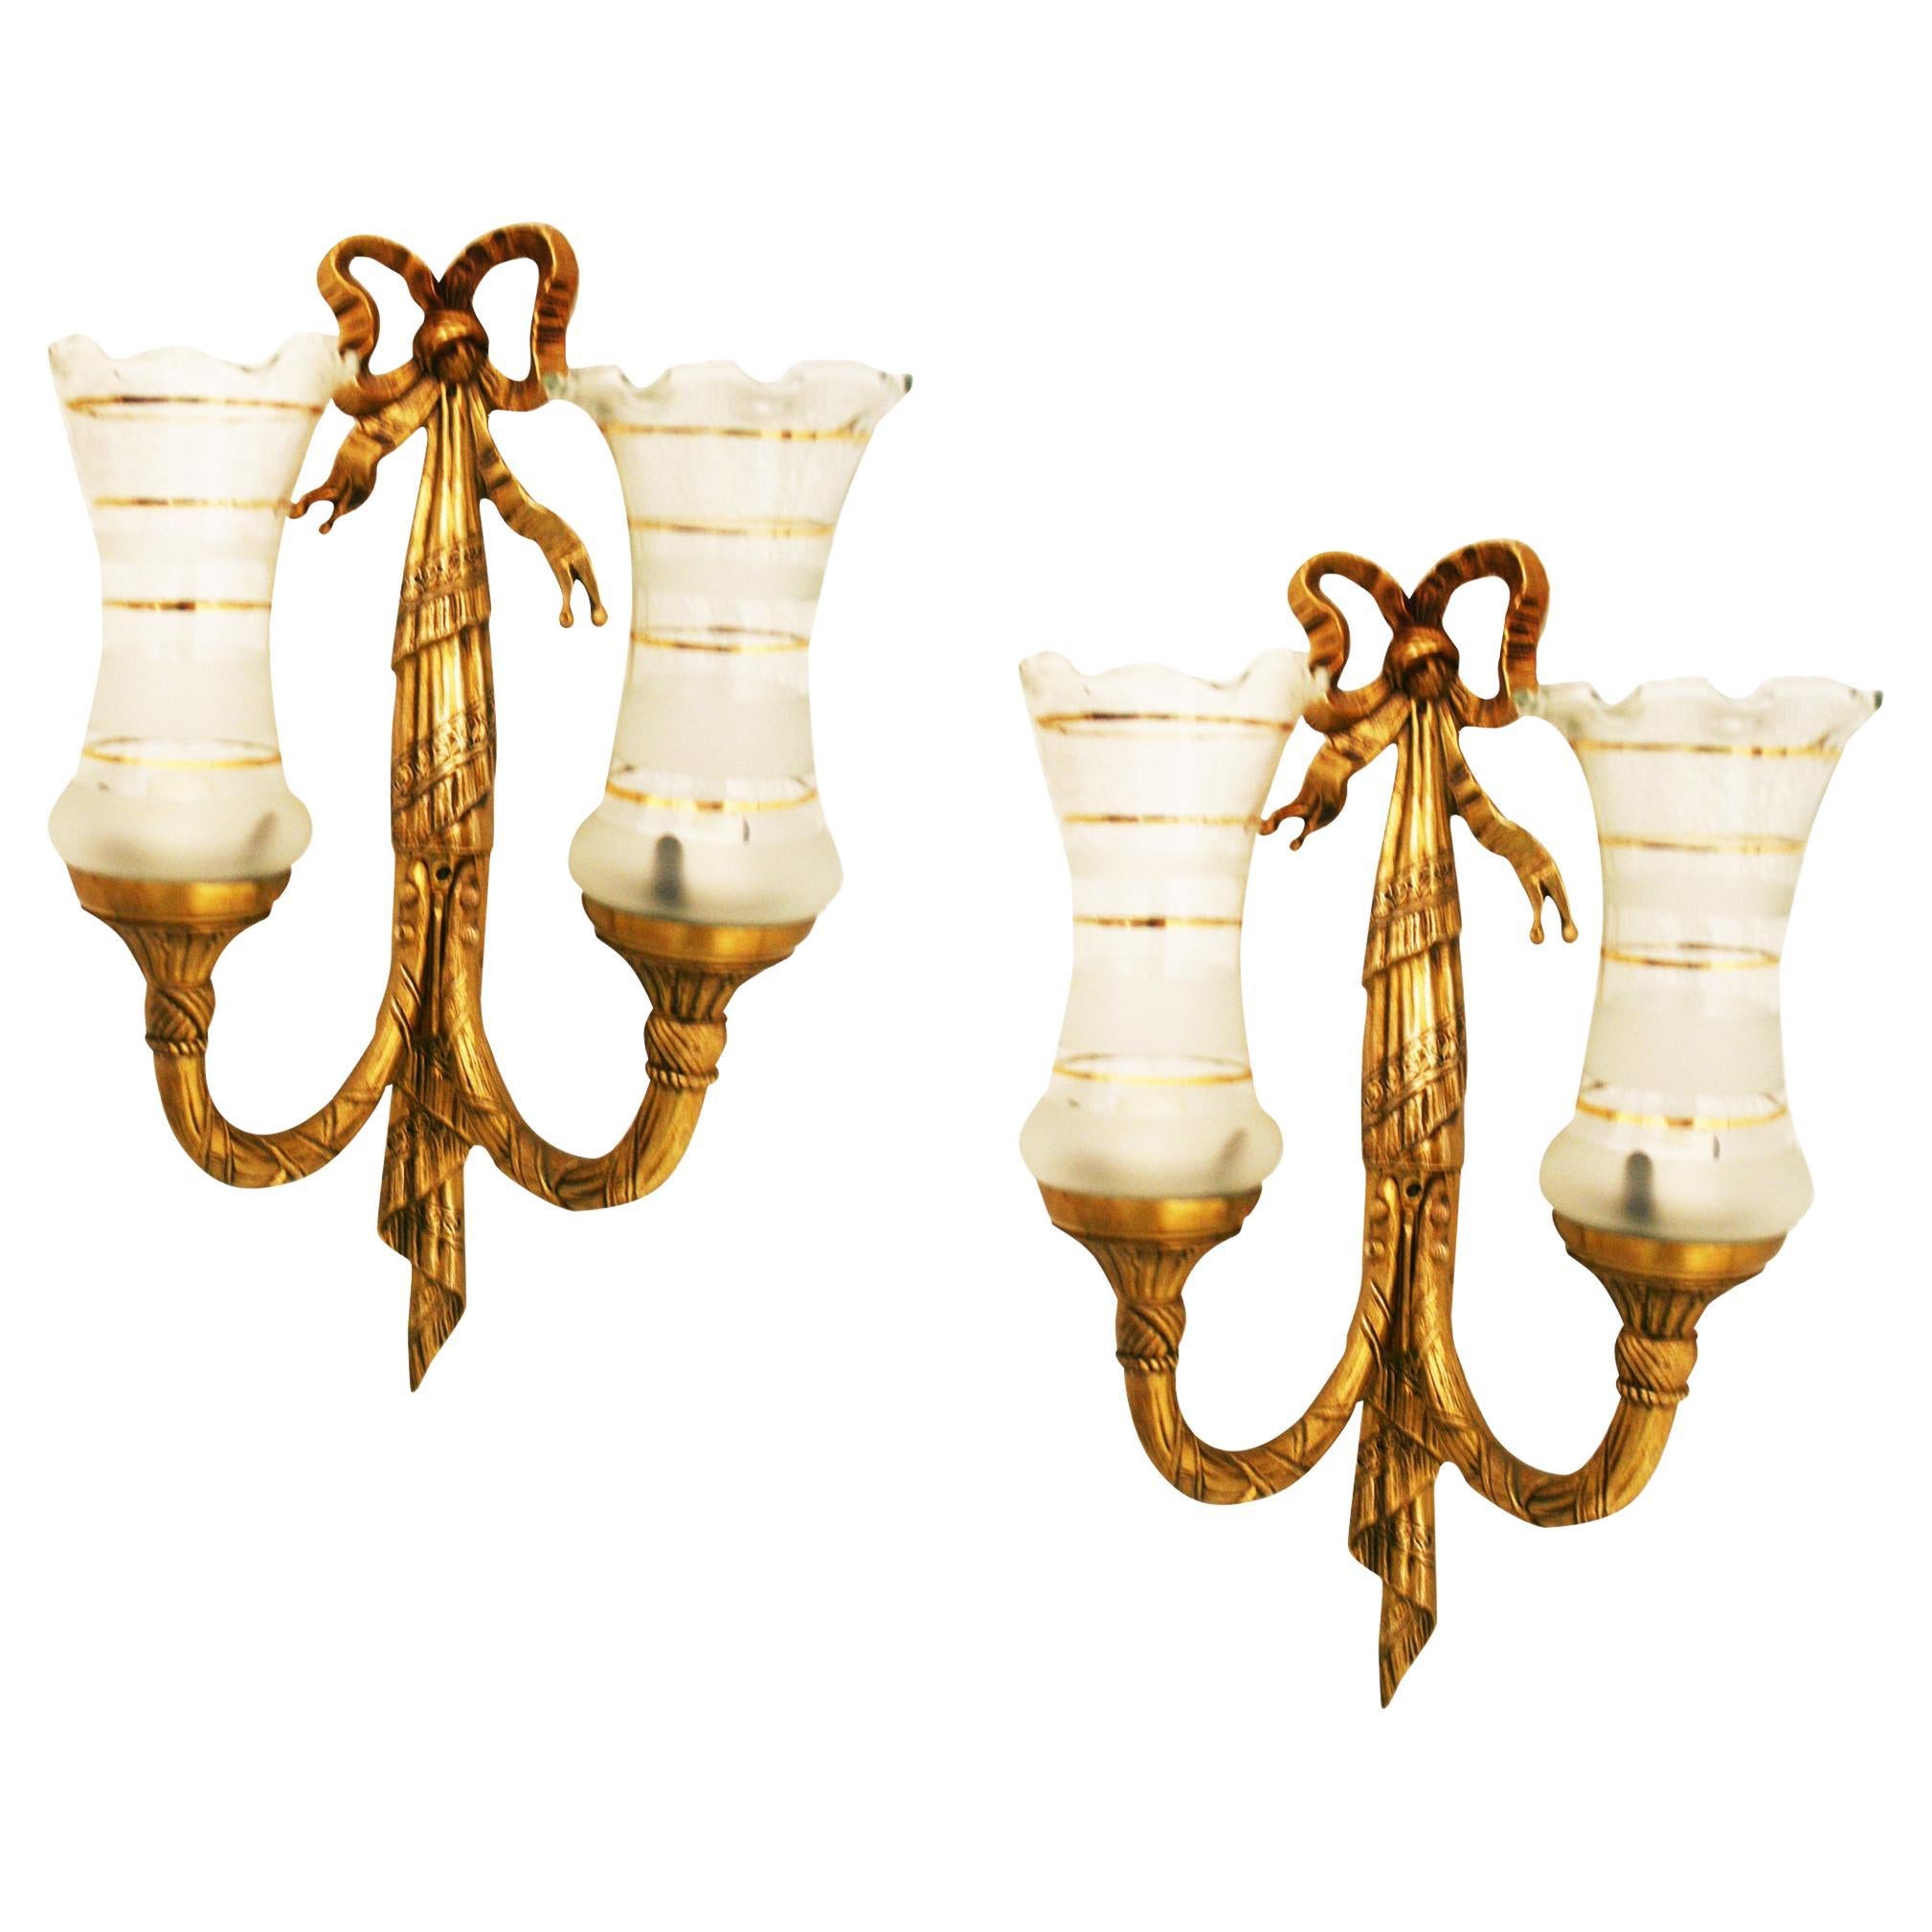  Wall Sconces with Two Lights, Louis XVI Style Golden Bronze or Brass Pair